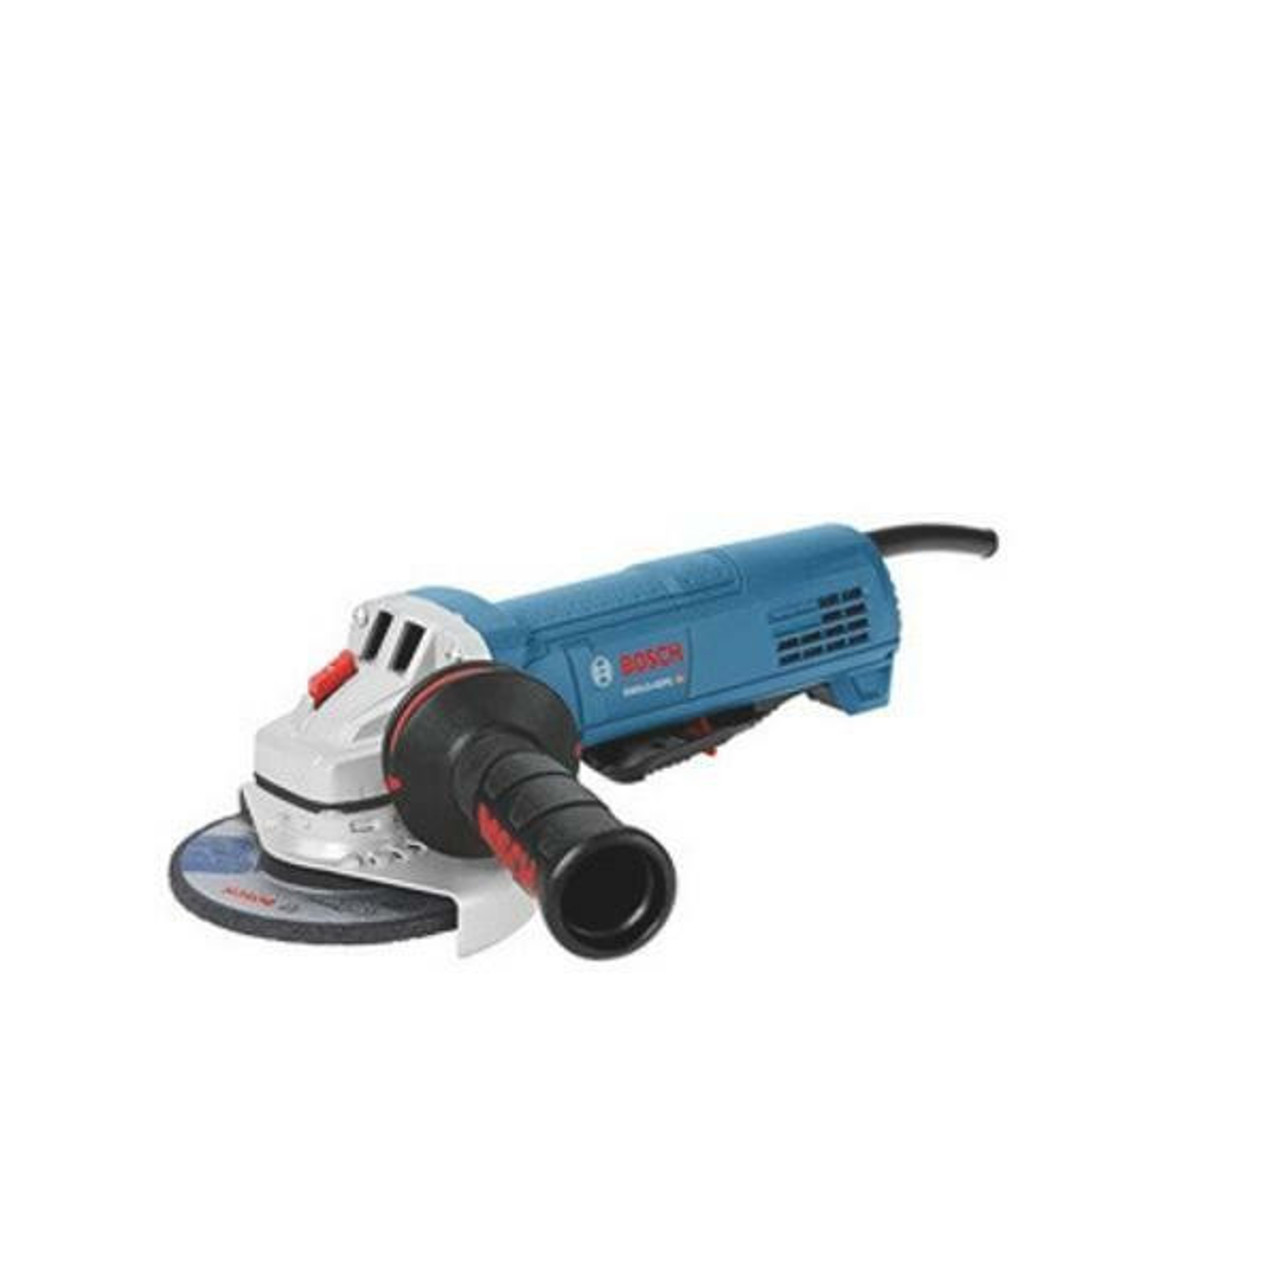 Bosch 4-1/2 in German Angle Grinder with Paddle Switch